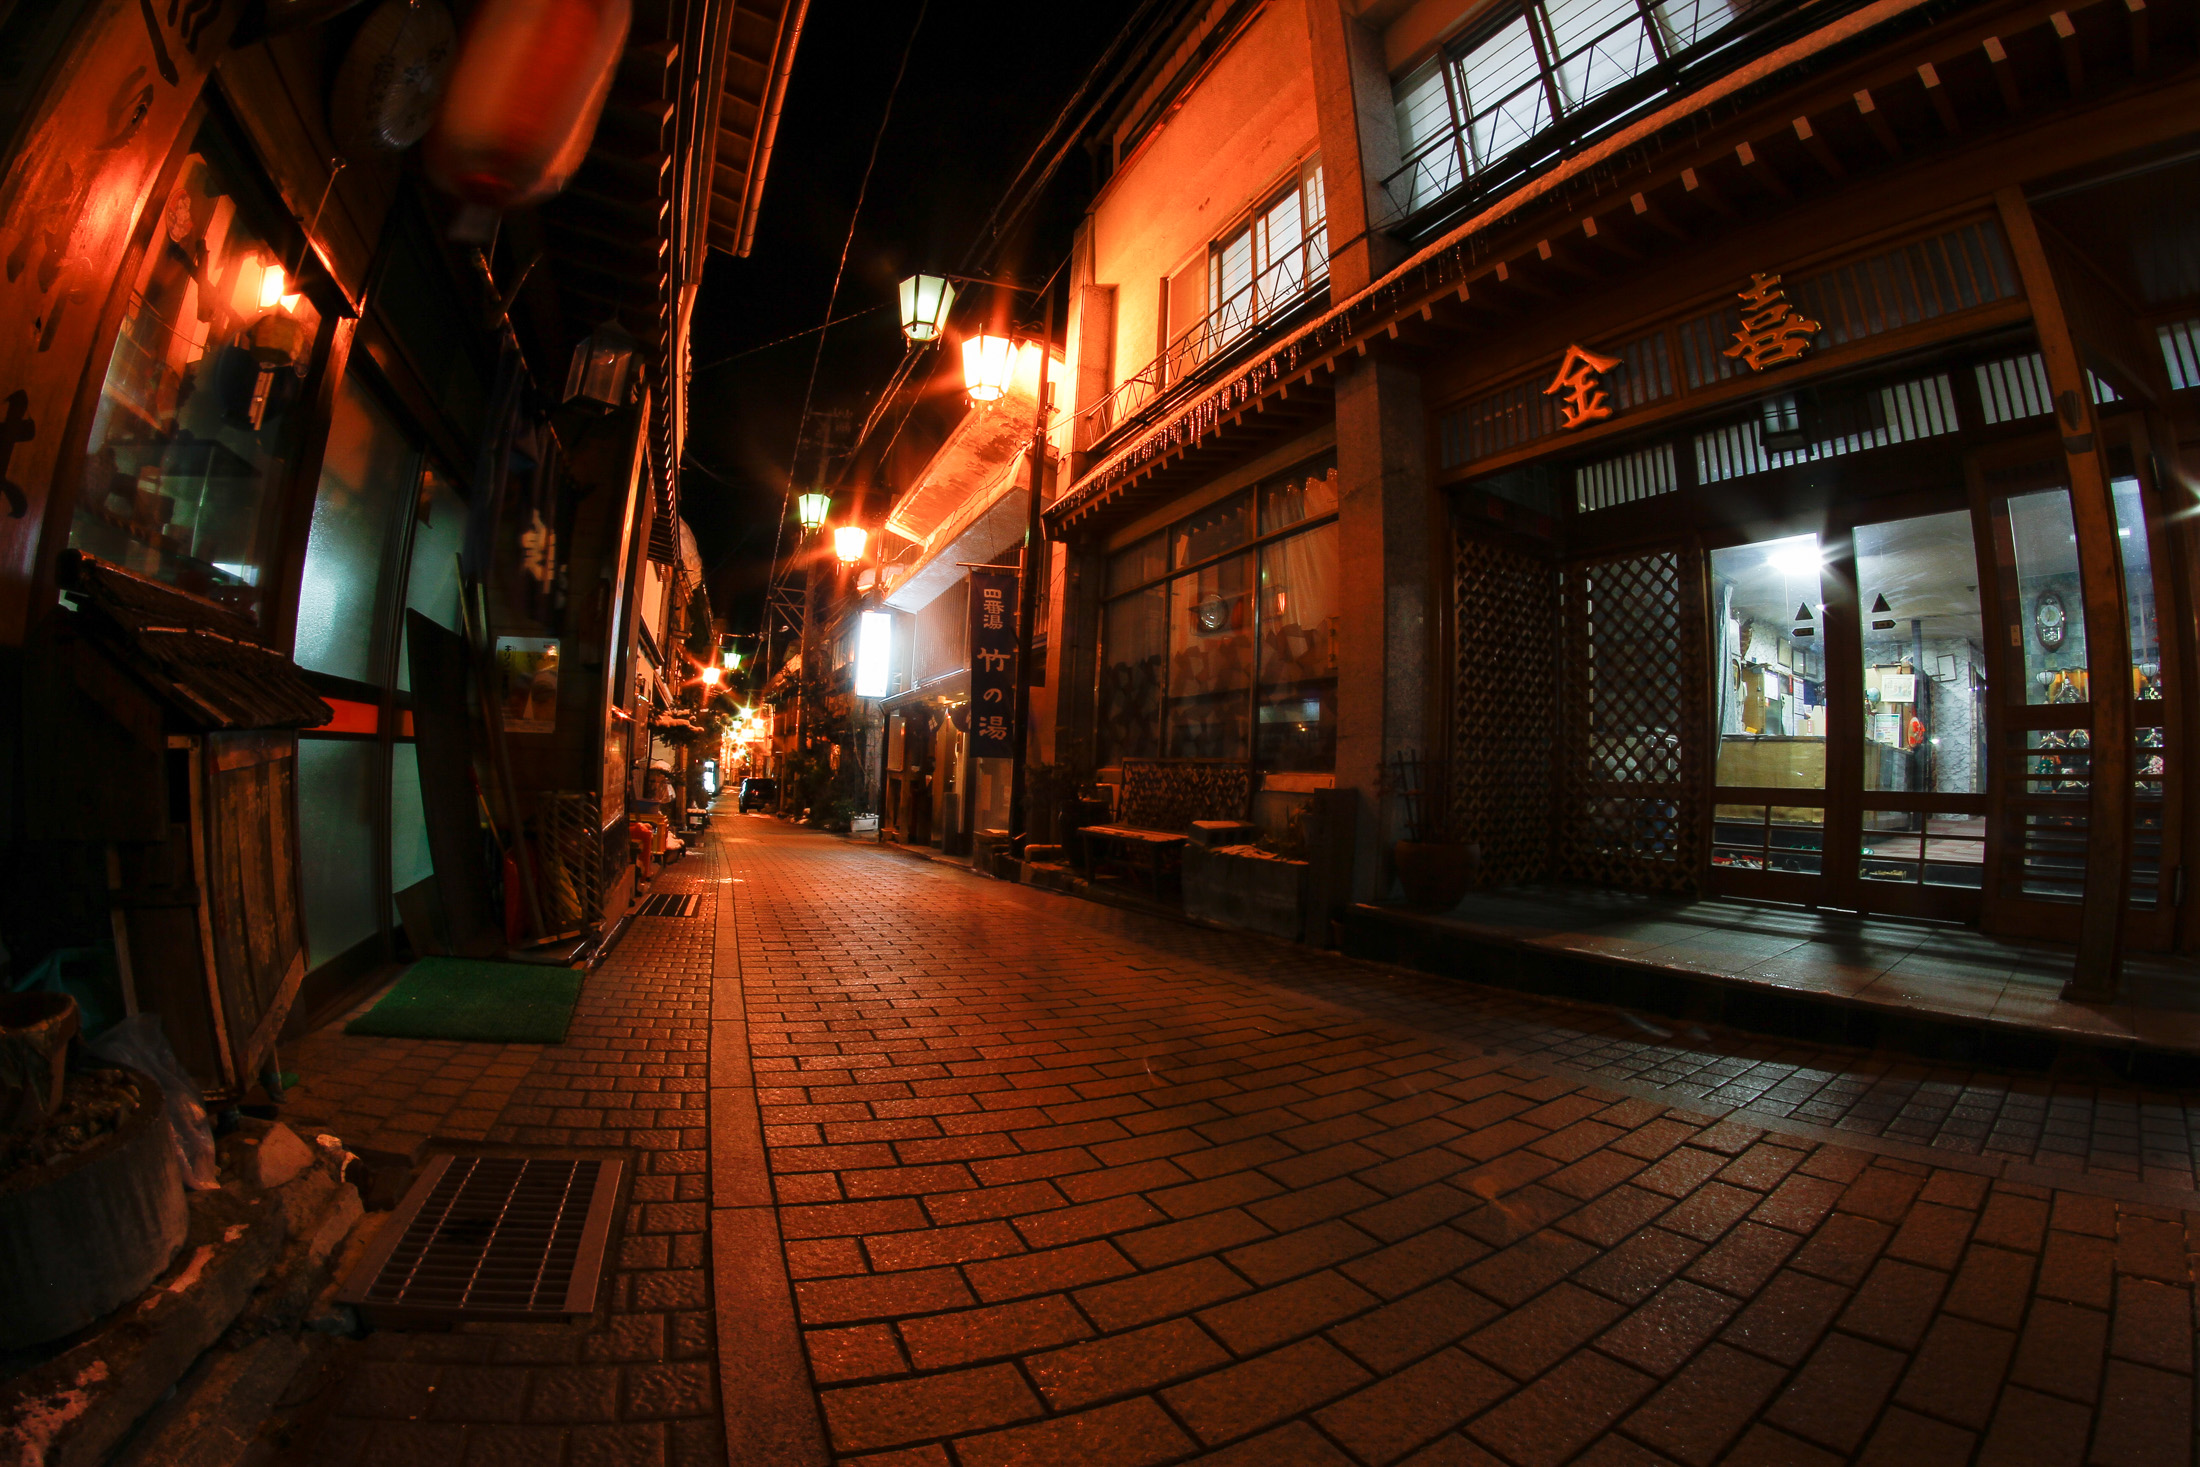 Discover the enchanting alleyways of historic Shibu Onsen, Japan, filled with lantern-lit wooden buildings.